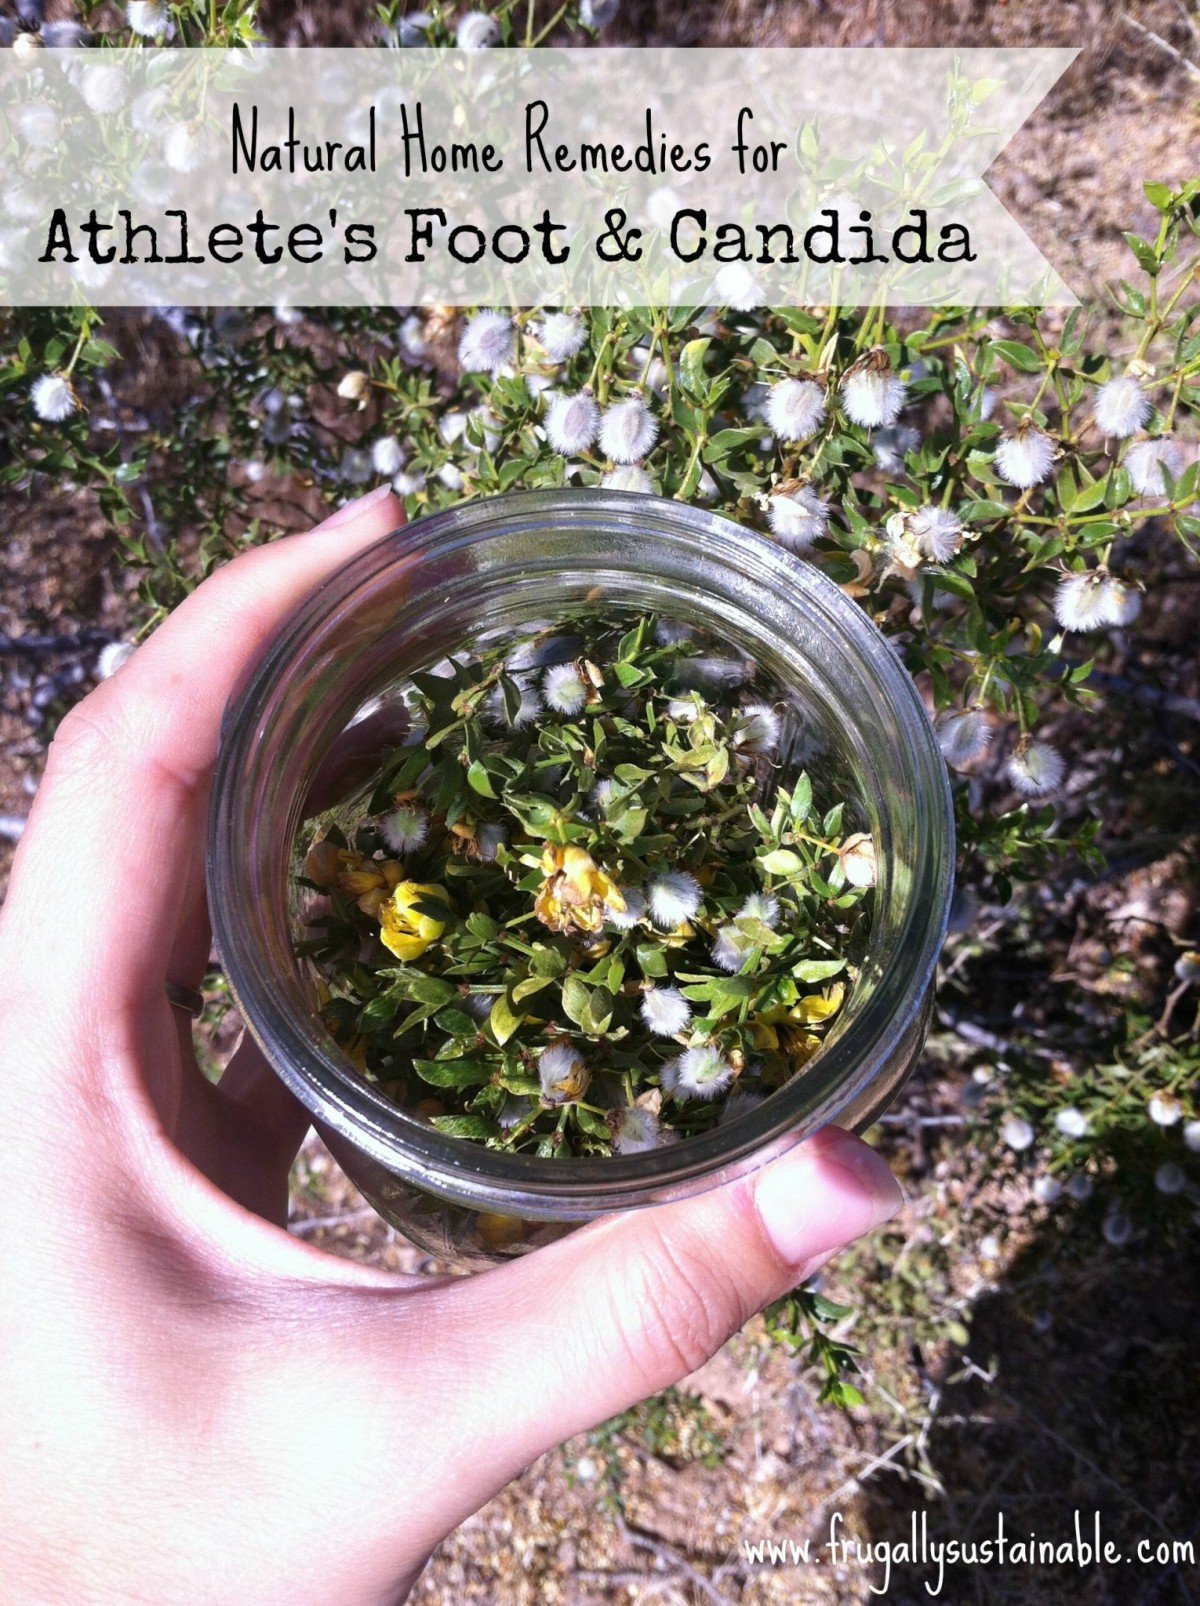 Natural Home Remedies for Athlete's Foot and Candida by Frugally Sustainable